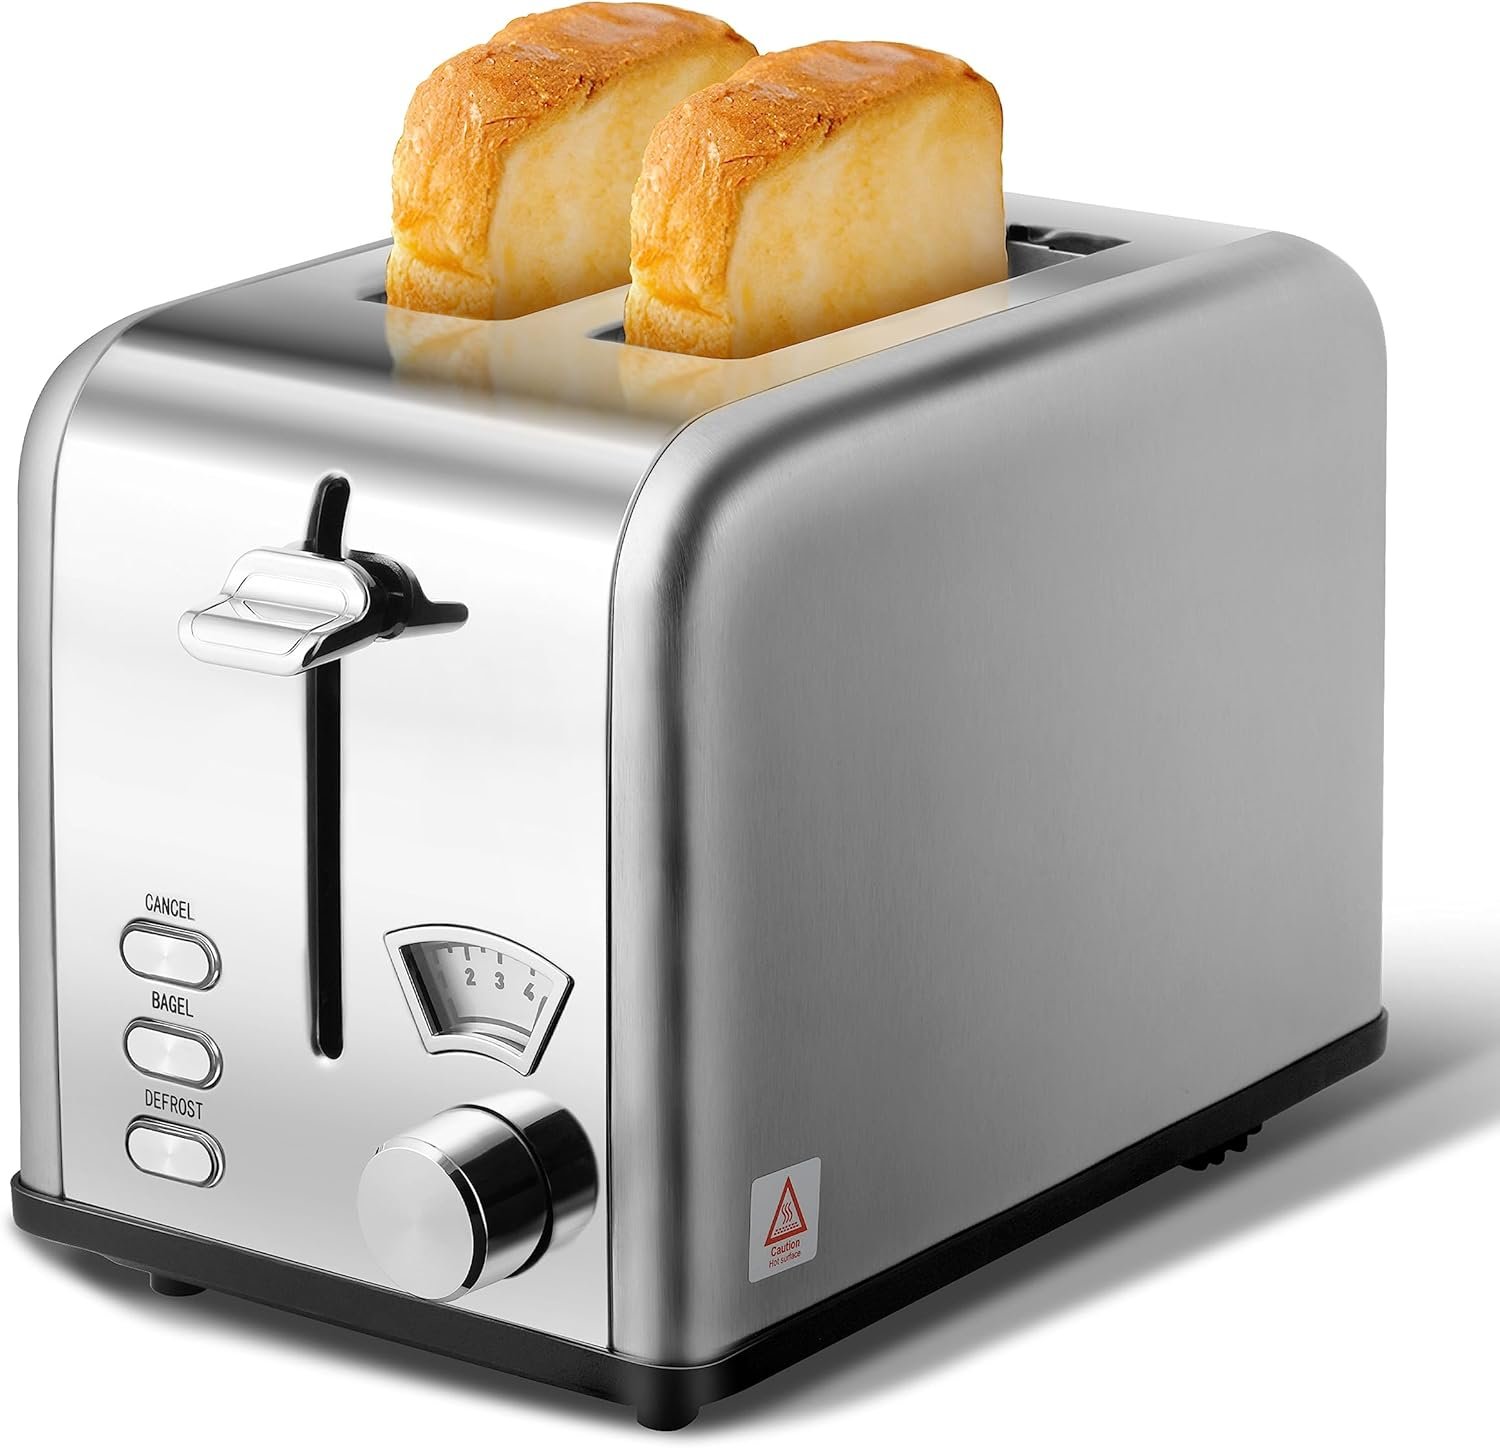 YSSOA 2-Slice Toaster with 1.5 inch Wide Slot, 5 Browning Setting and 3 Function: Bagel, Defrost  Cancel, Retro Stainless-Steel Style, Toast Bread Machine with Removable Crumb Tray, Silver